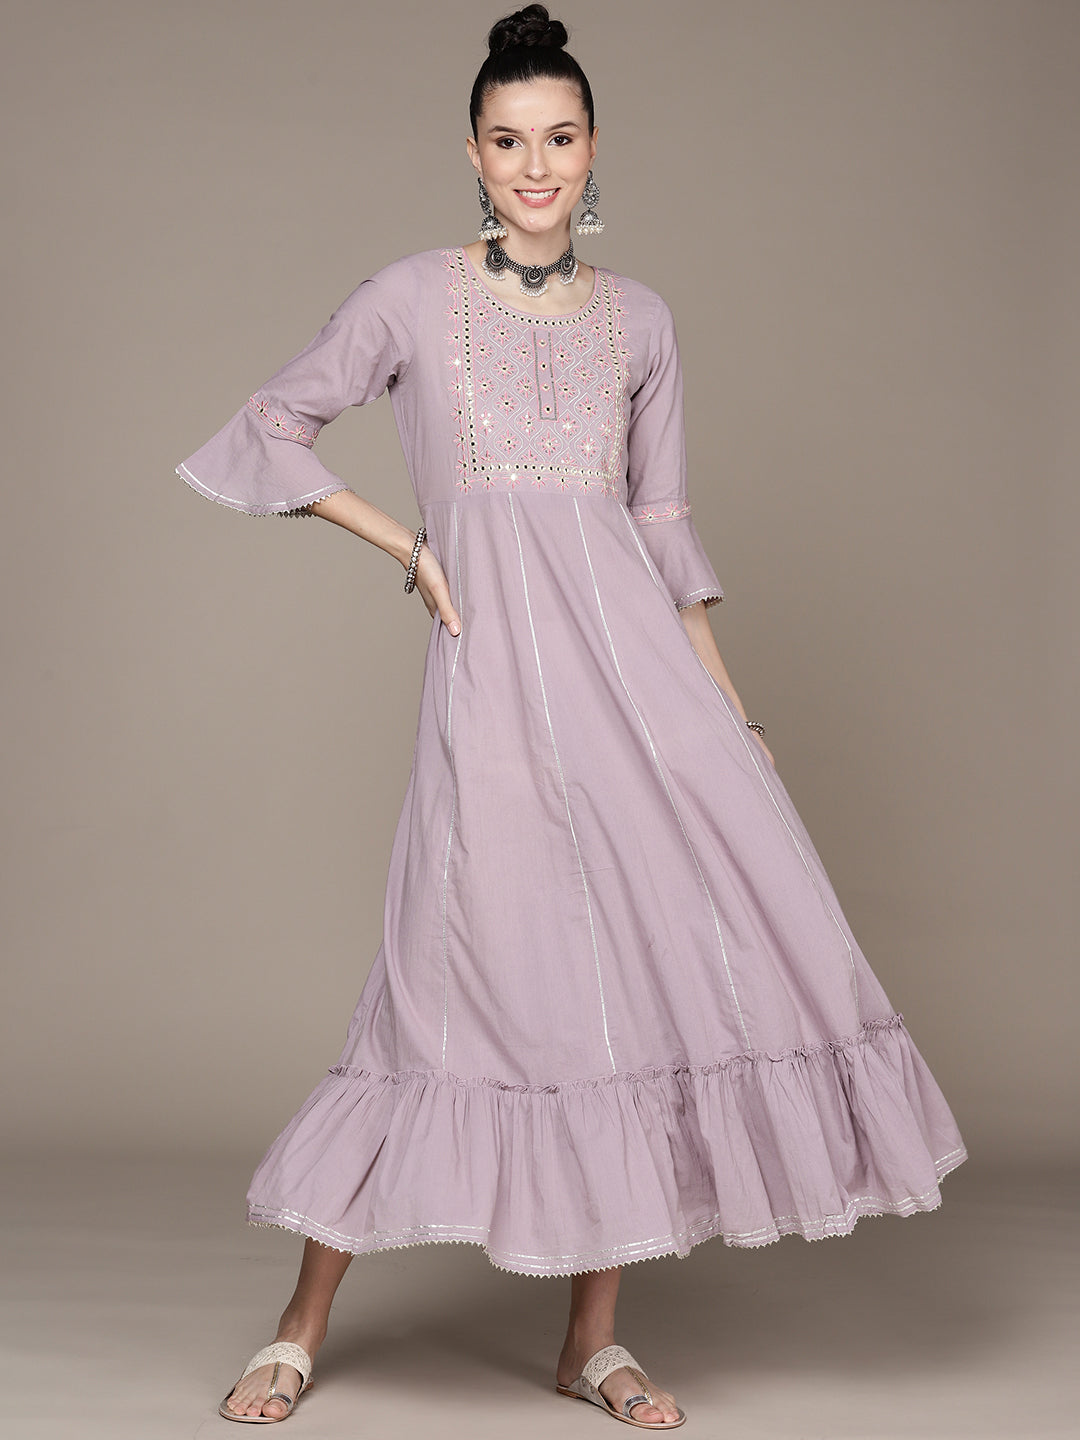 Women's Lilac Cotton Embroidered A-Line Dress